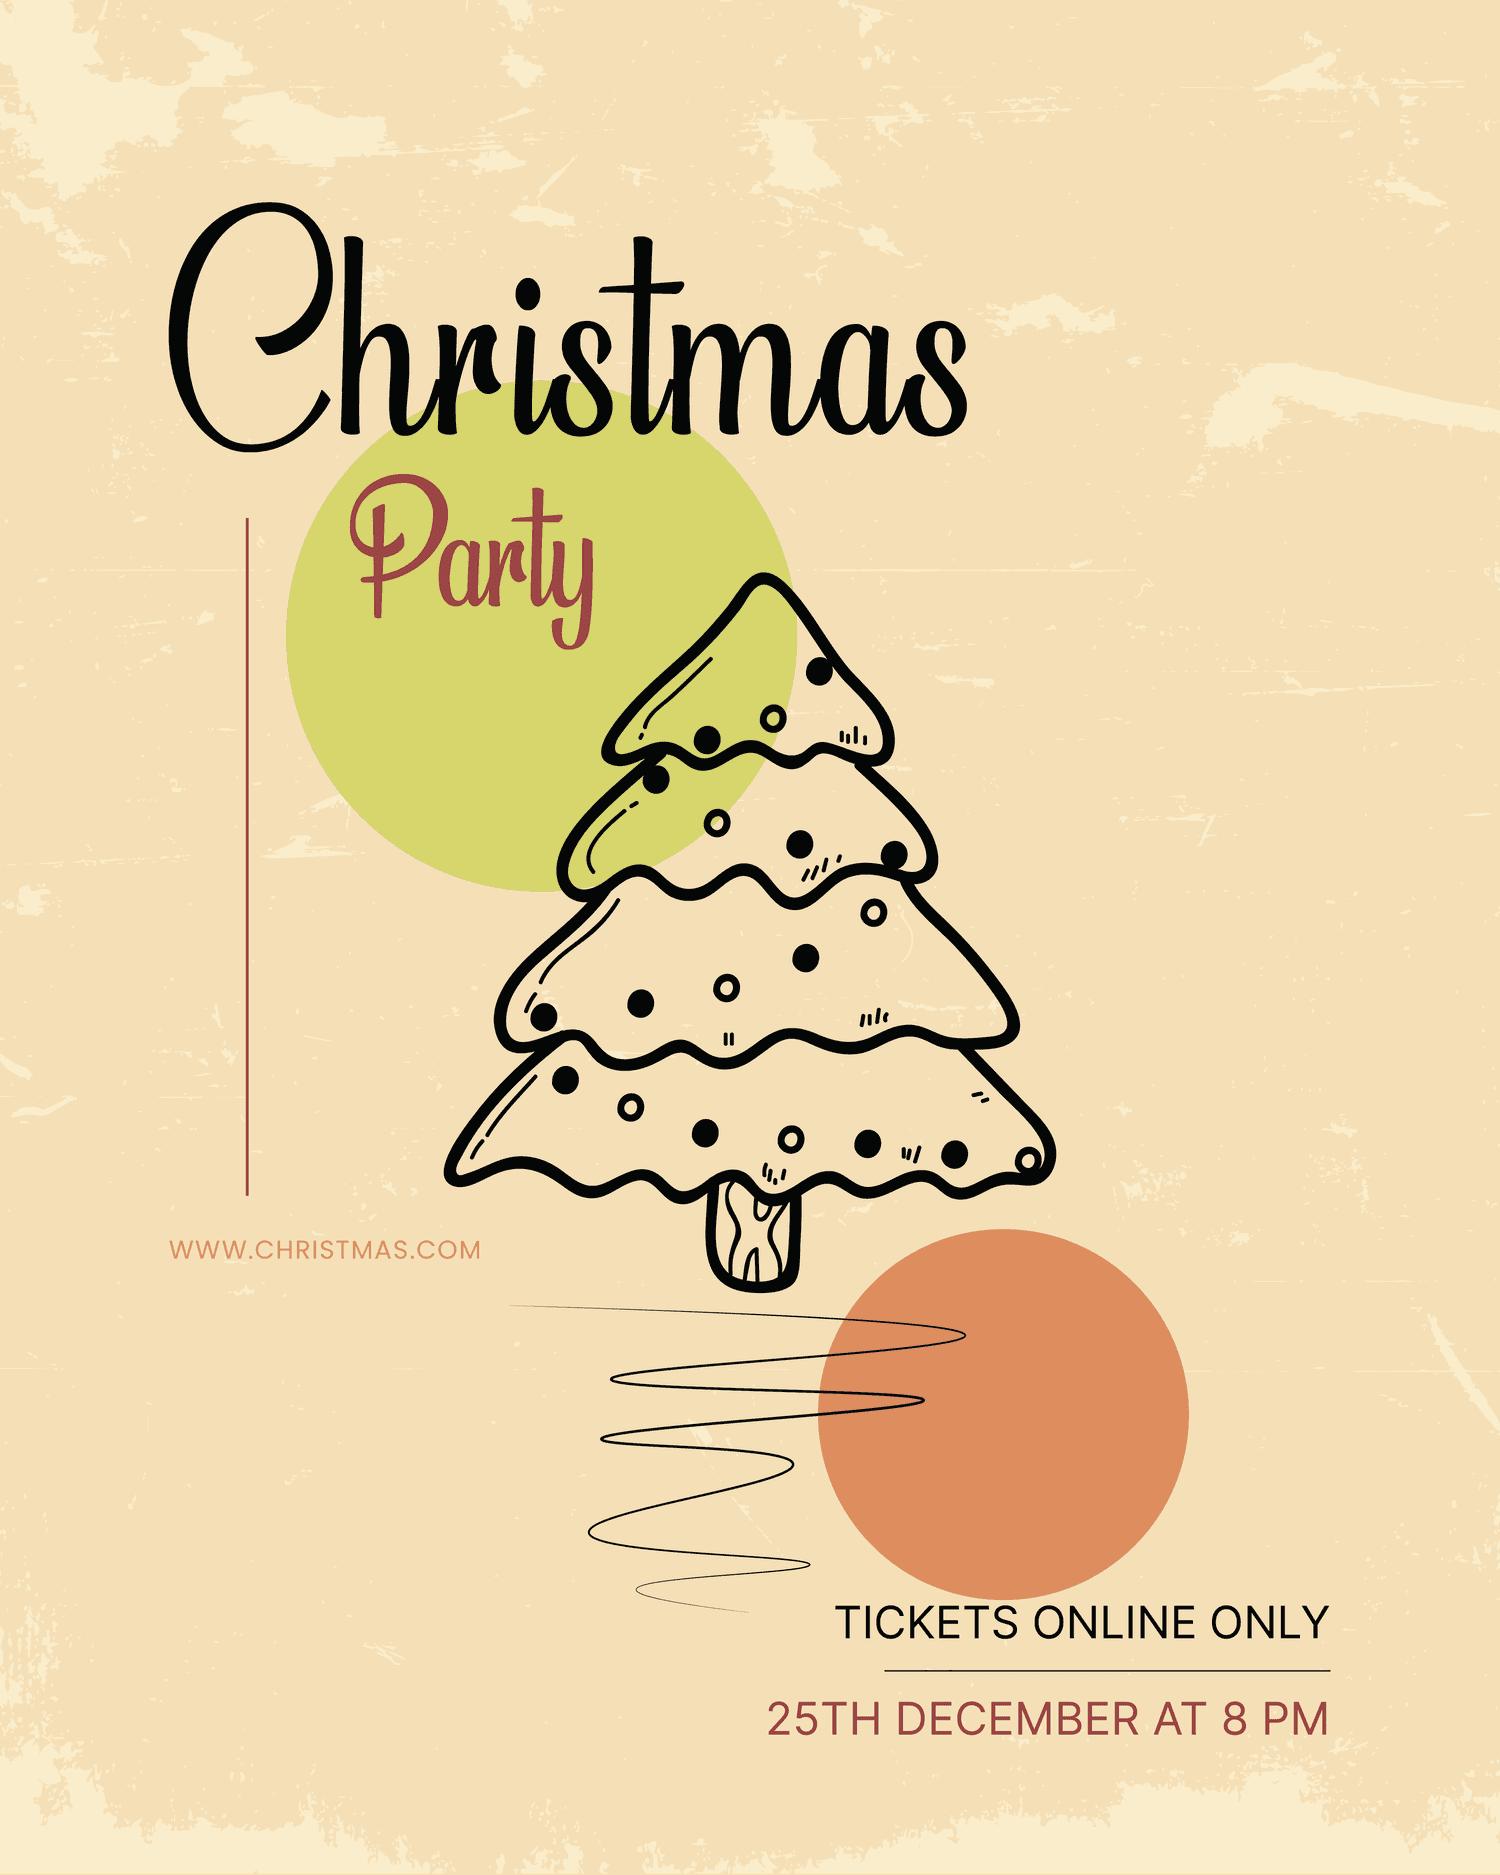 Hand drawn Christmas themed poster with classic colors